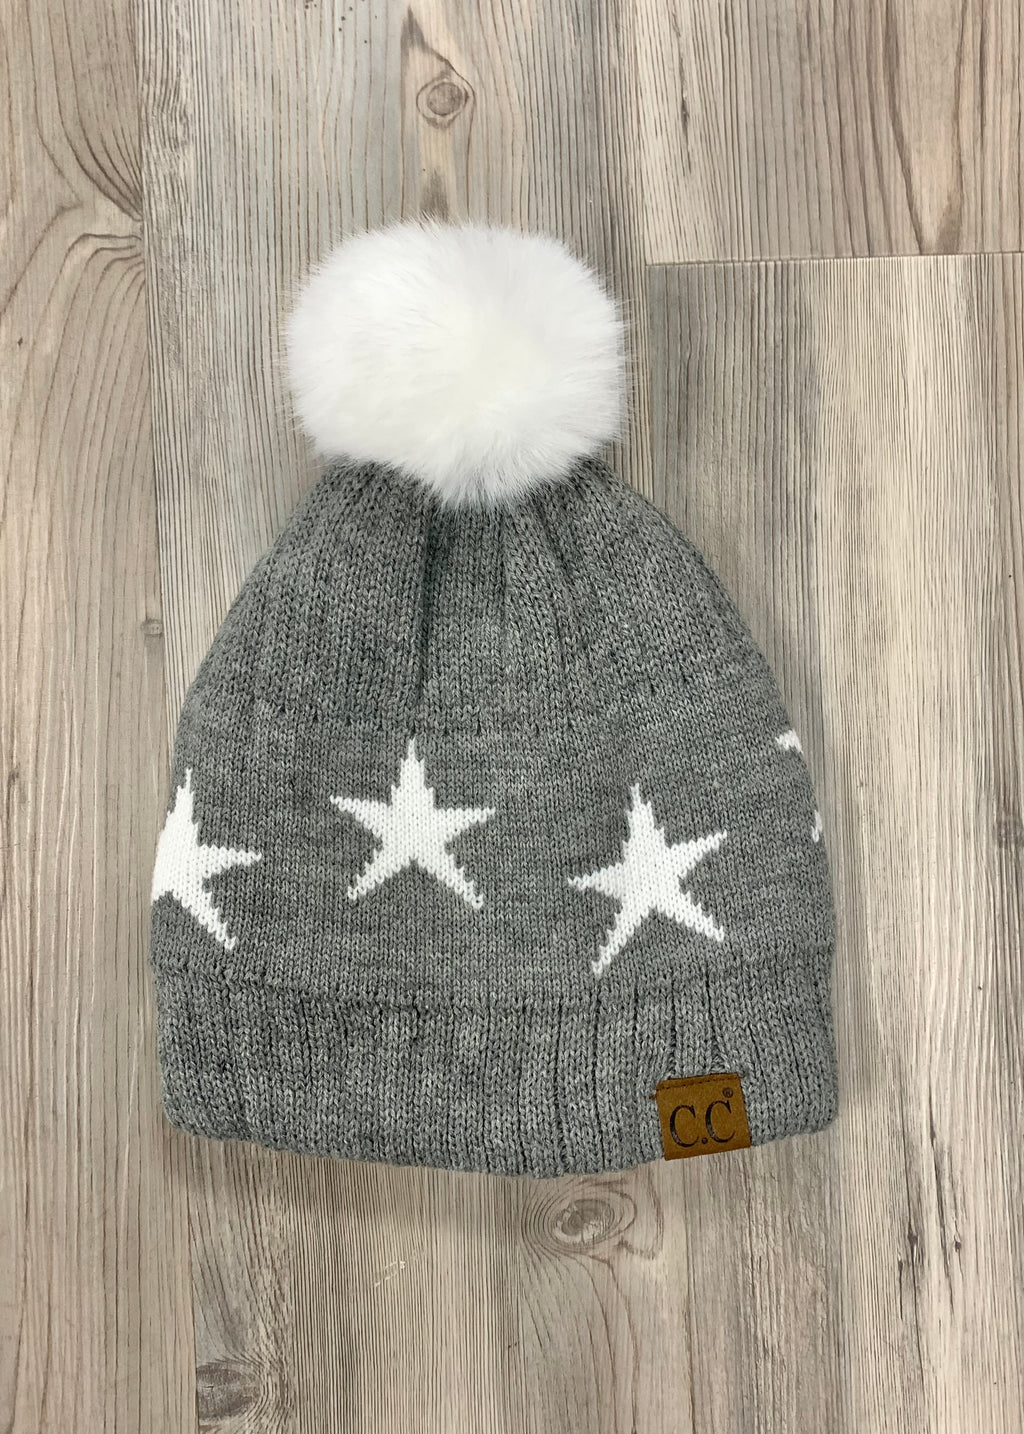 Star Patterned Beanie